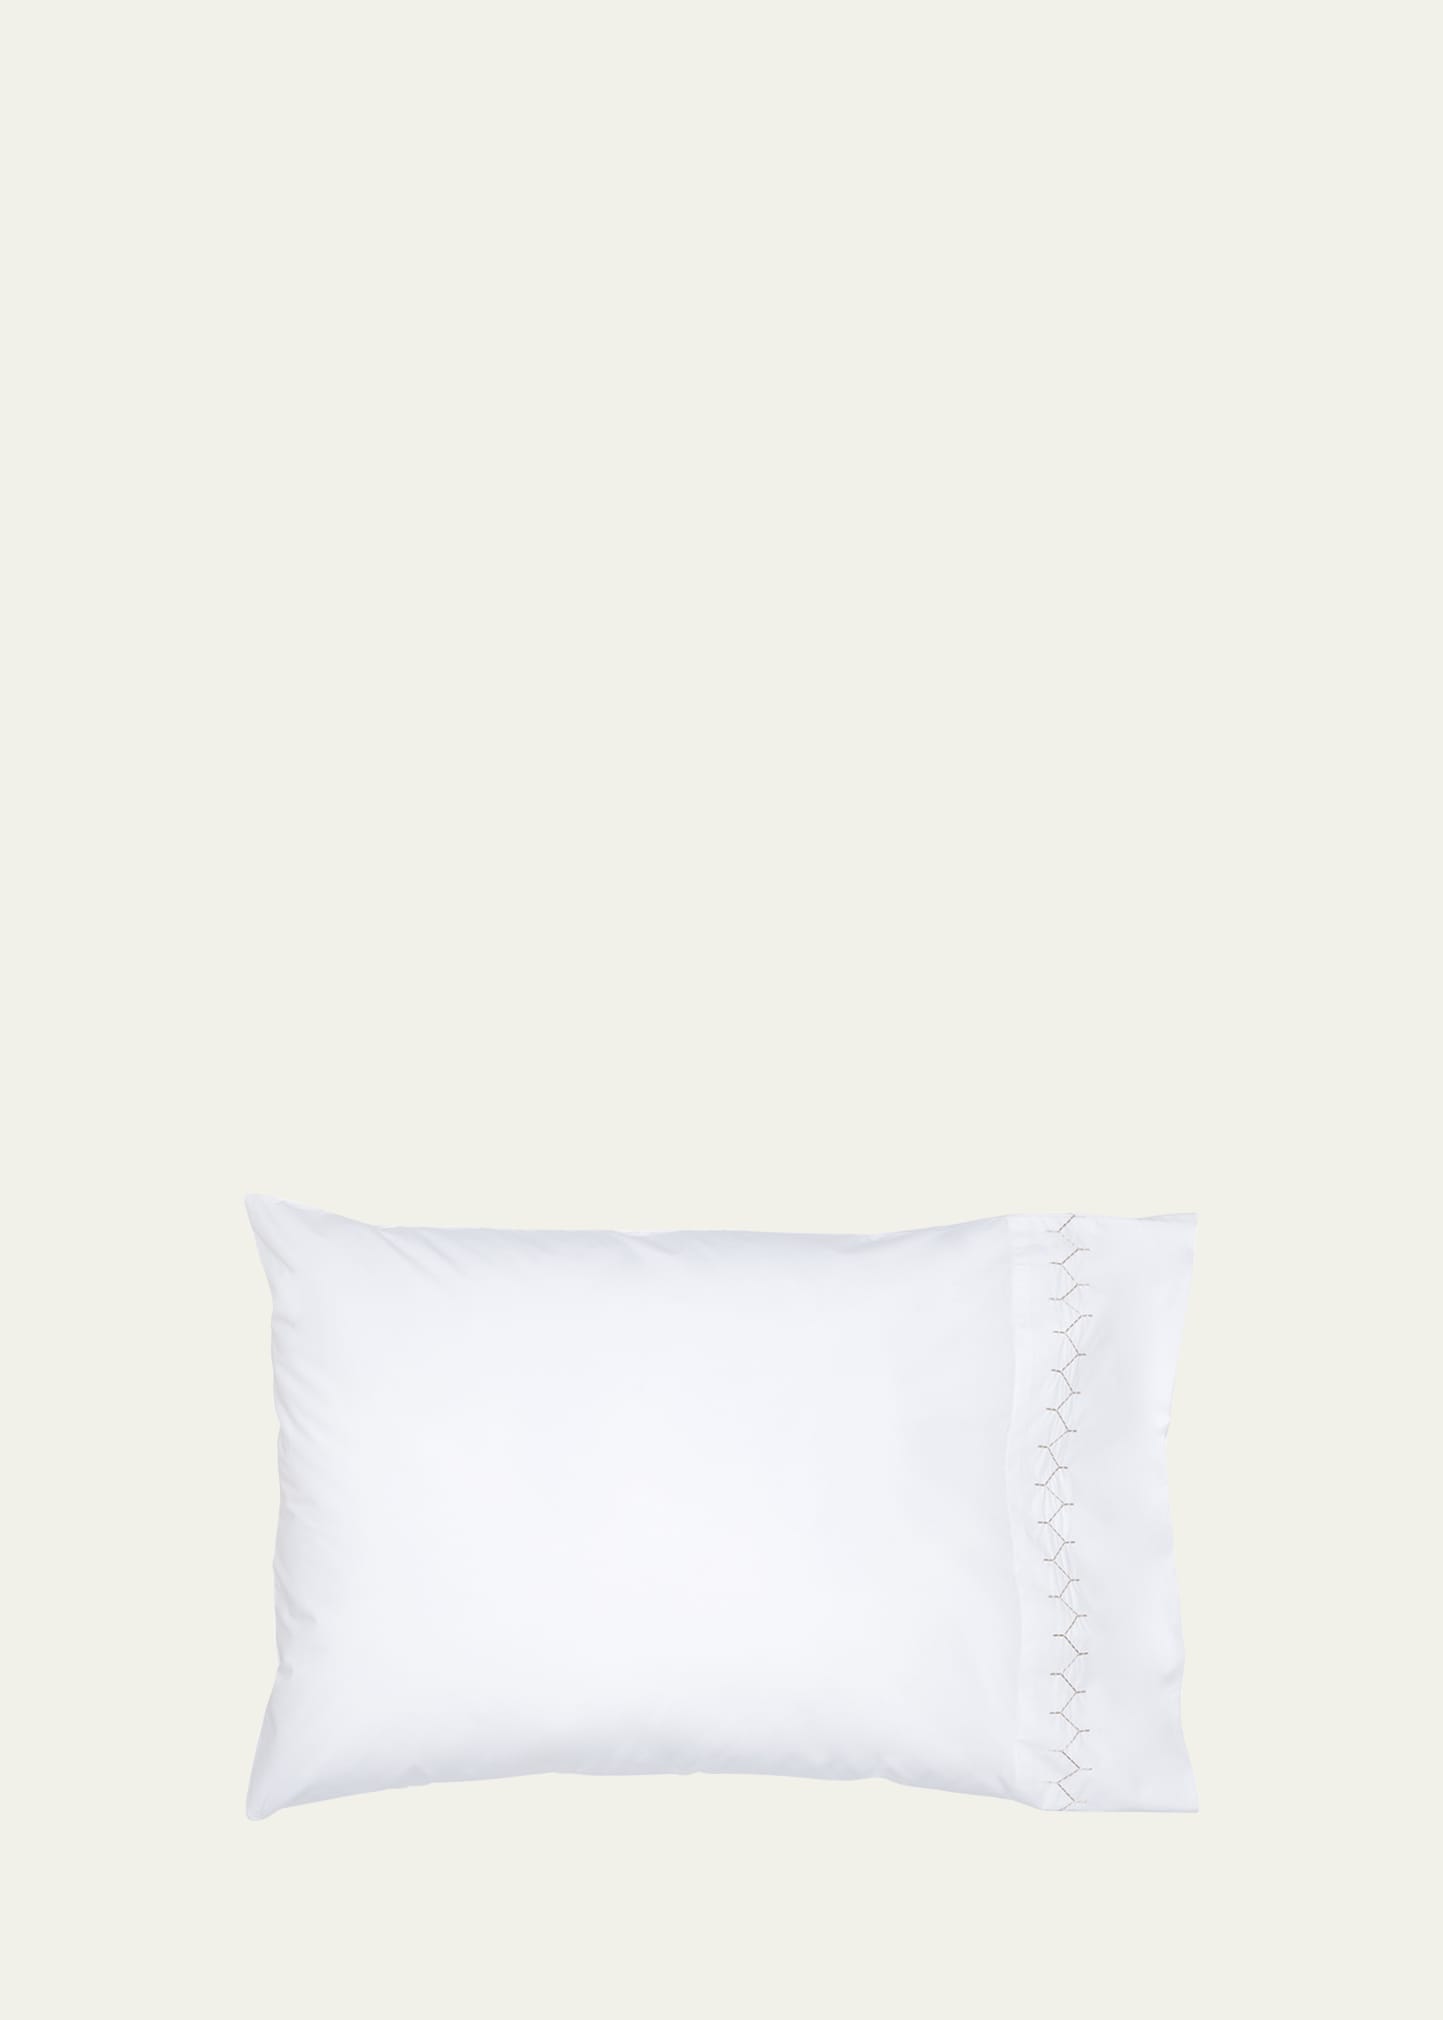 Stitched 300 Thread Count King Pillowcases, Set of 2